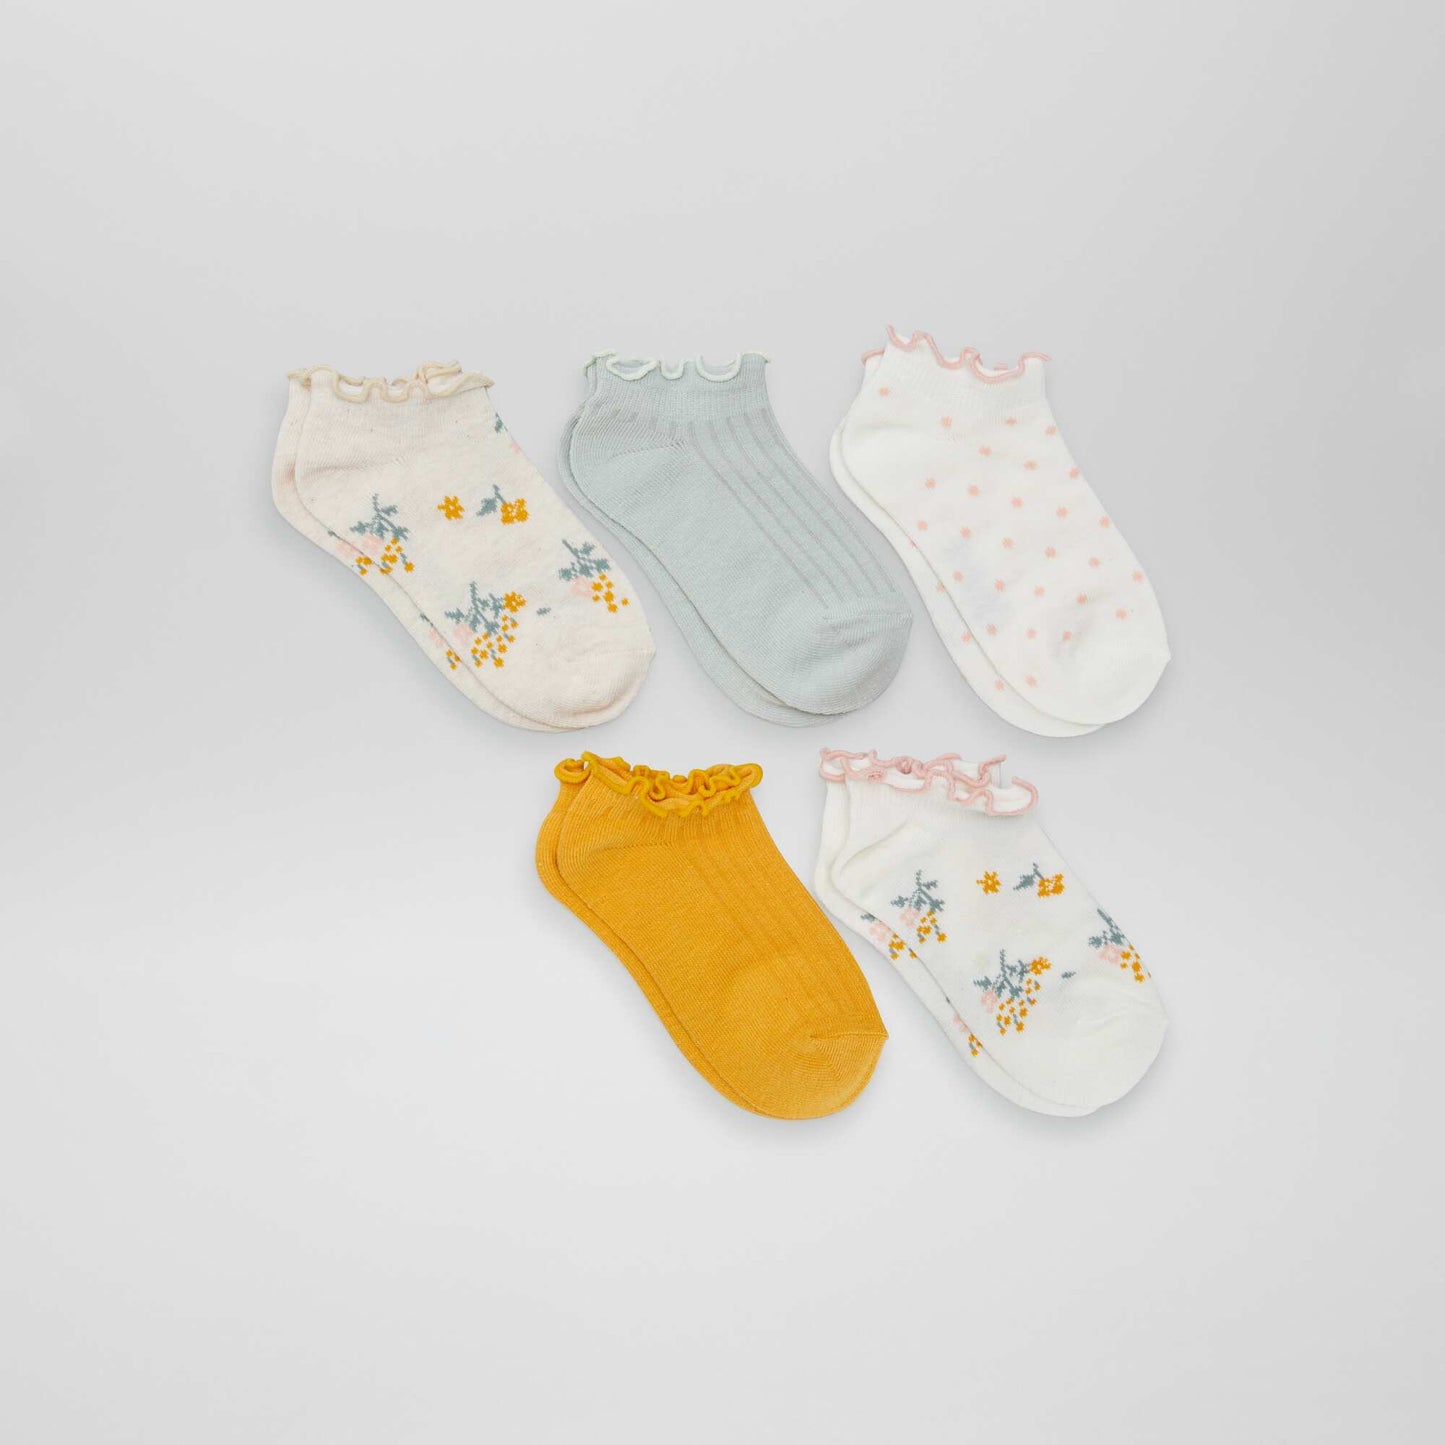 Pack of 5 pairs of patterned socks YELLOW